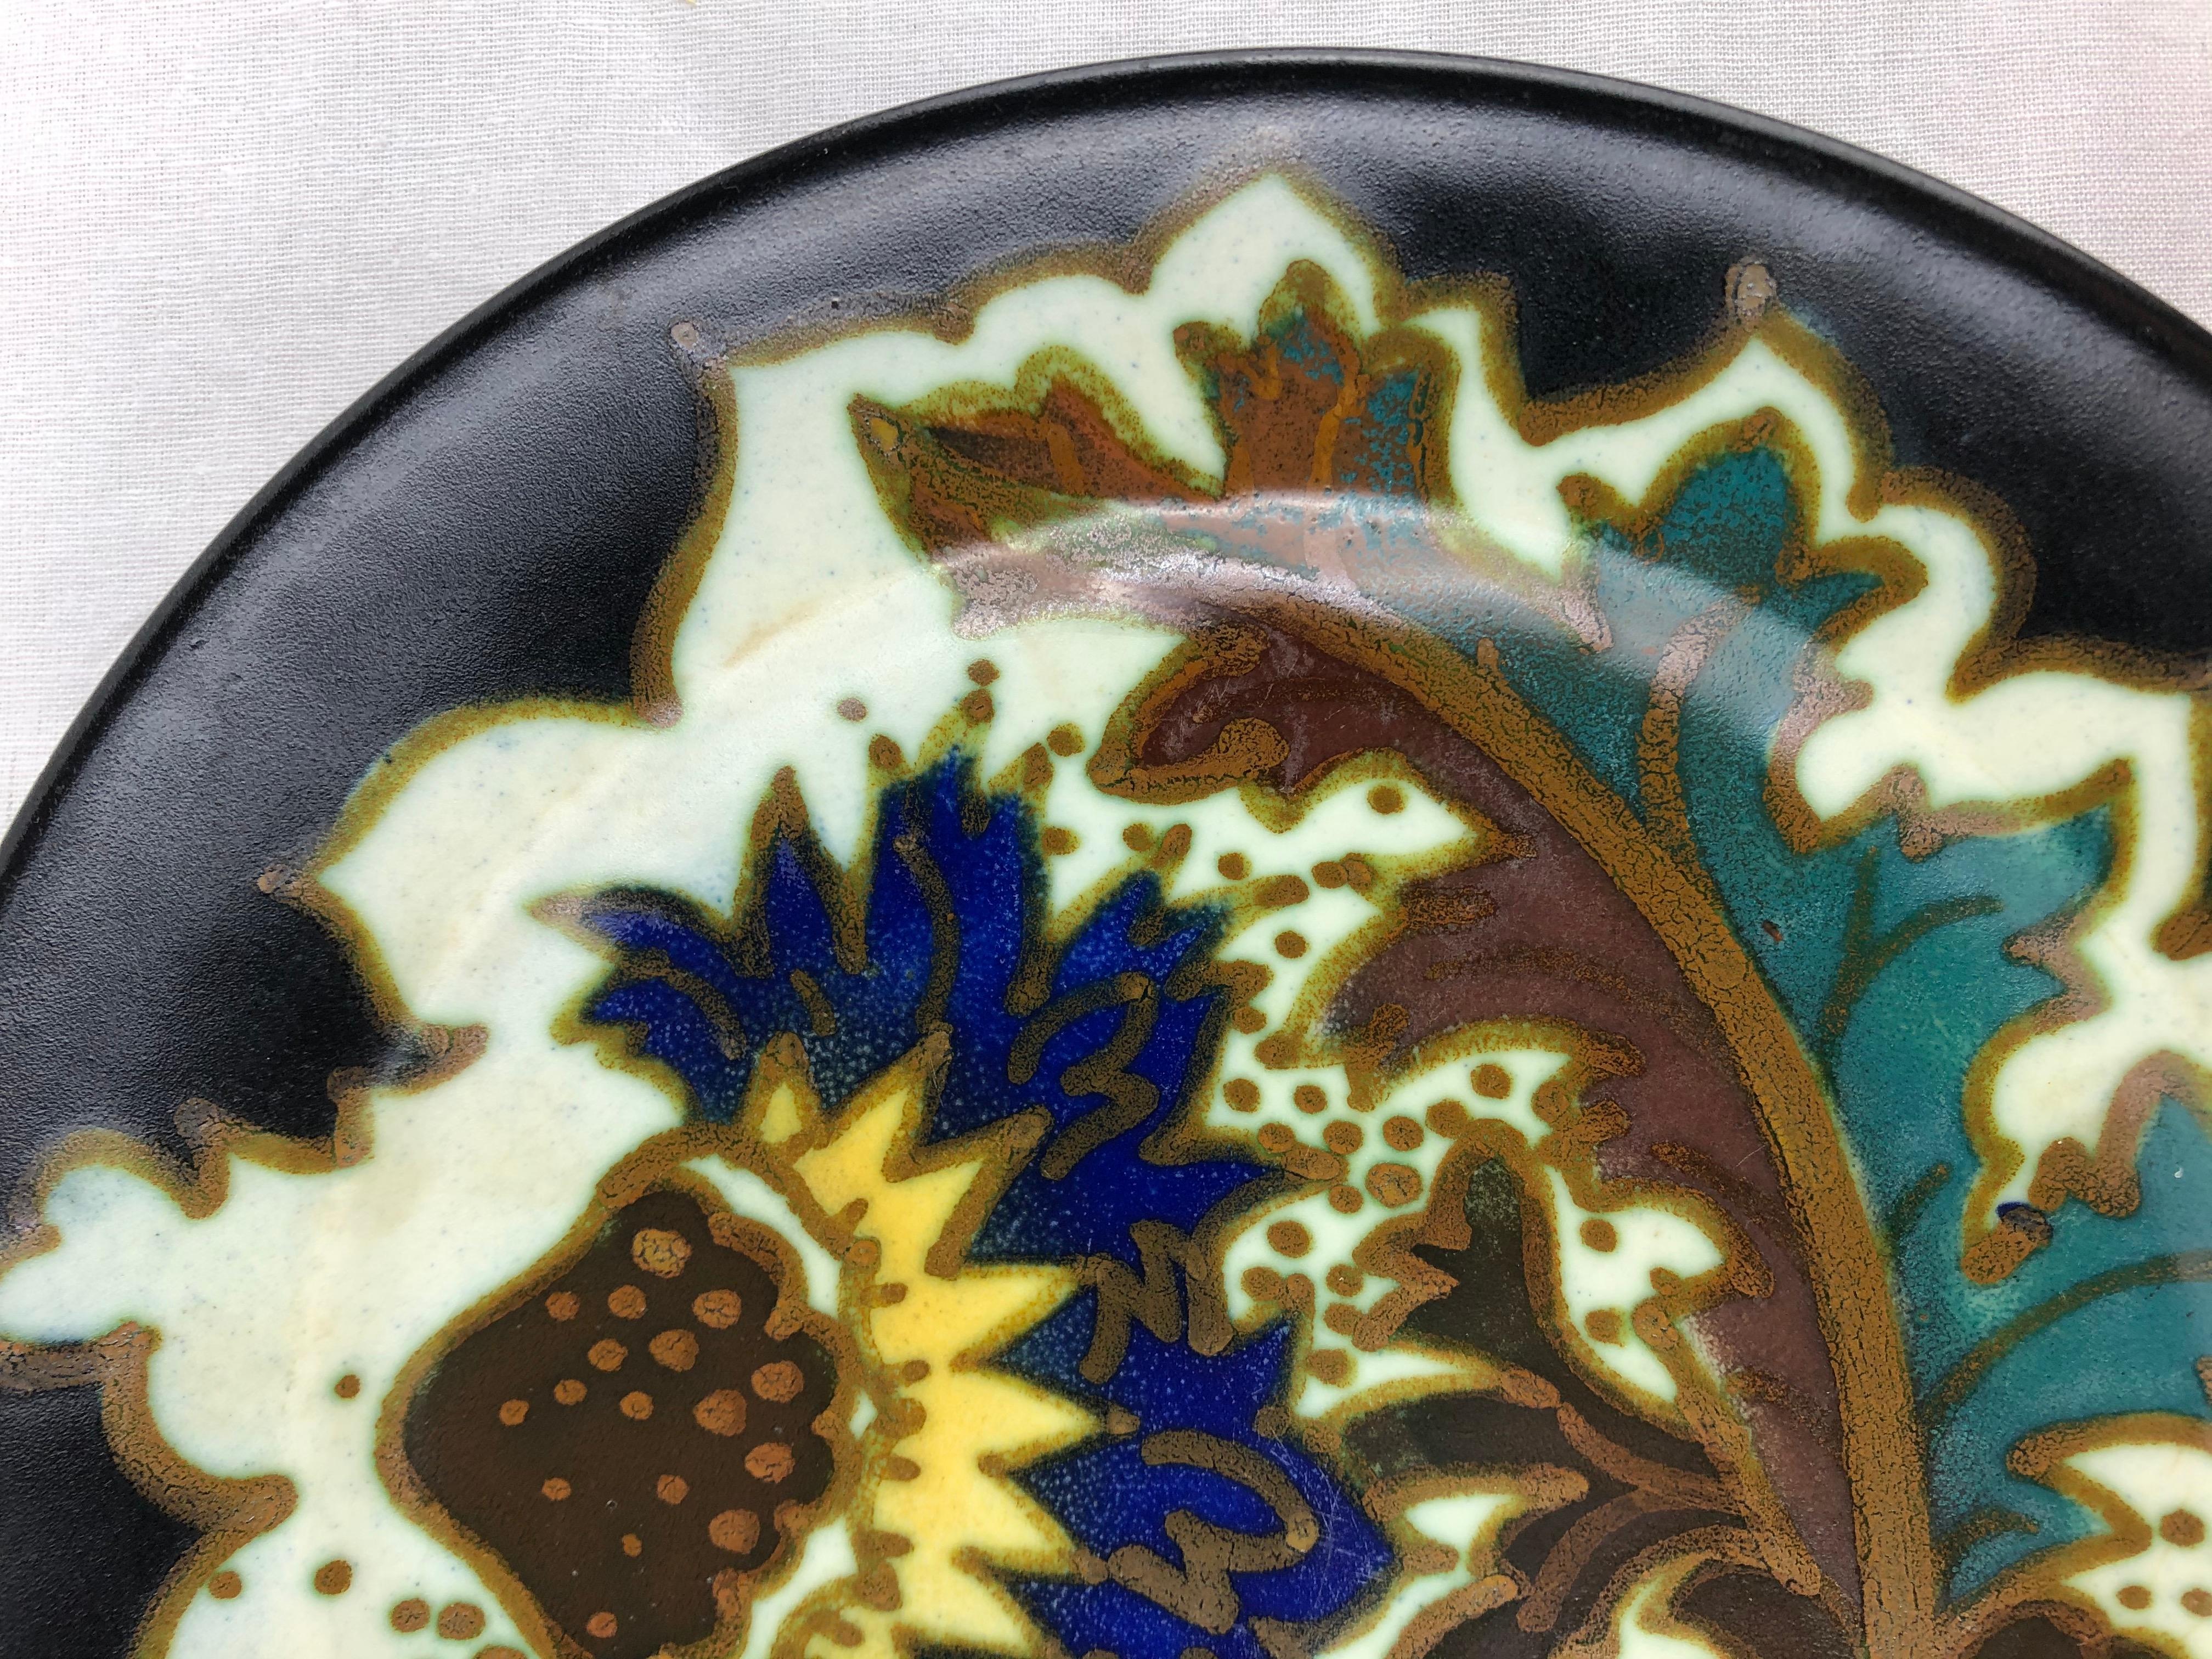 Dutch Art Deco ceramic dish from Gouda, Holland with traditional period flowery and curvaceous designs, circa 1920s, matte glaze, which for us is the mixture of abstract and floral designs.

Very colorful and pleasing to the eye.
Beautiful